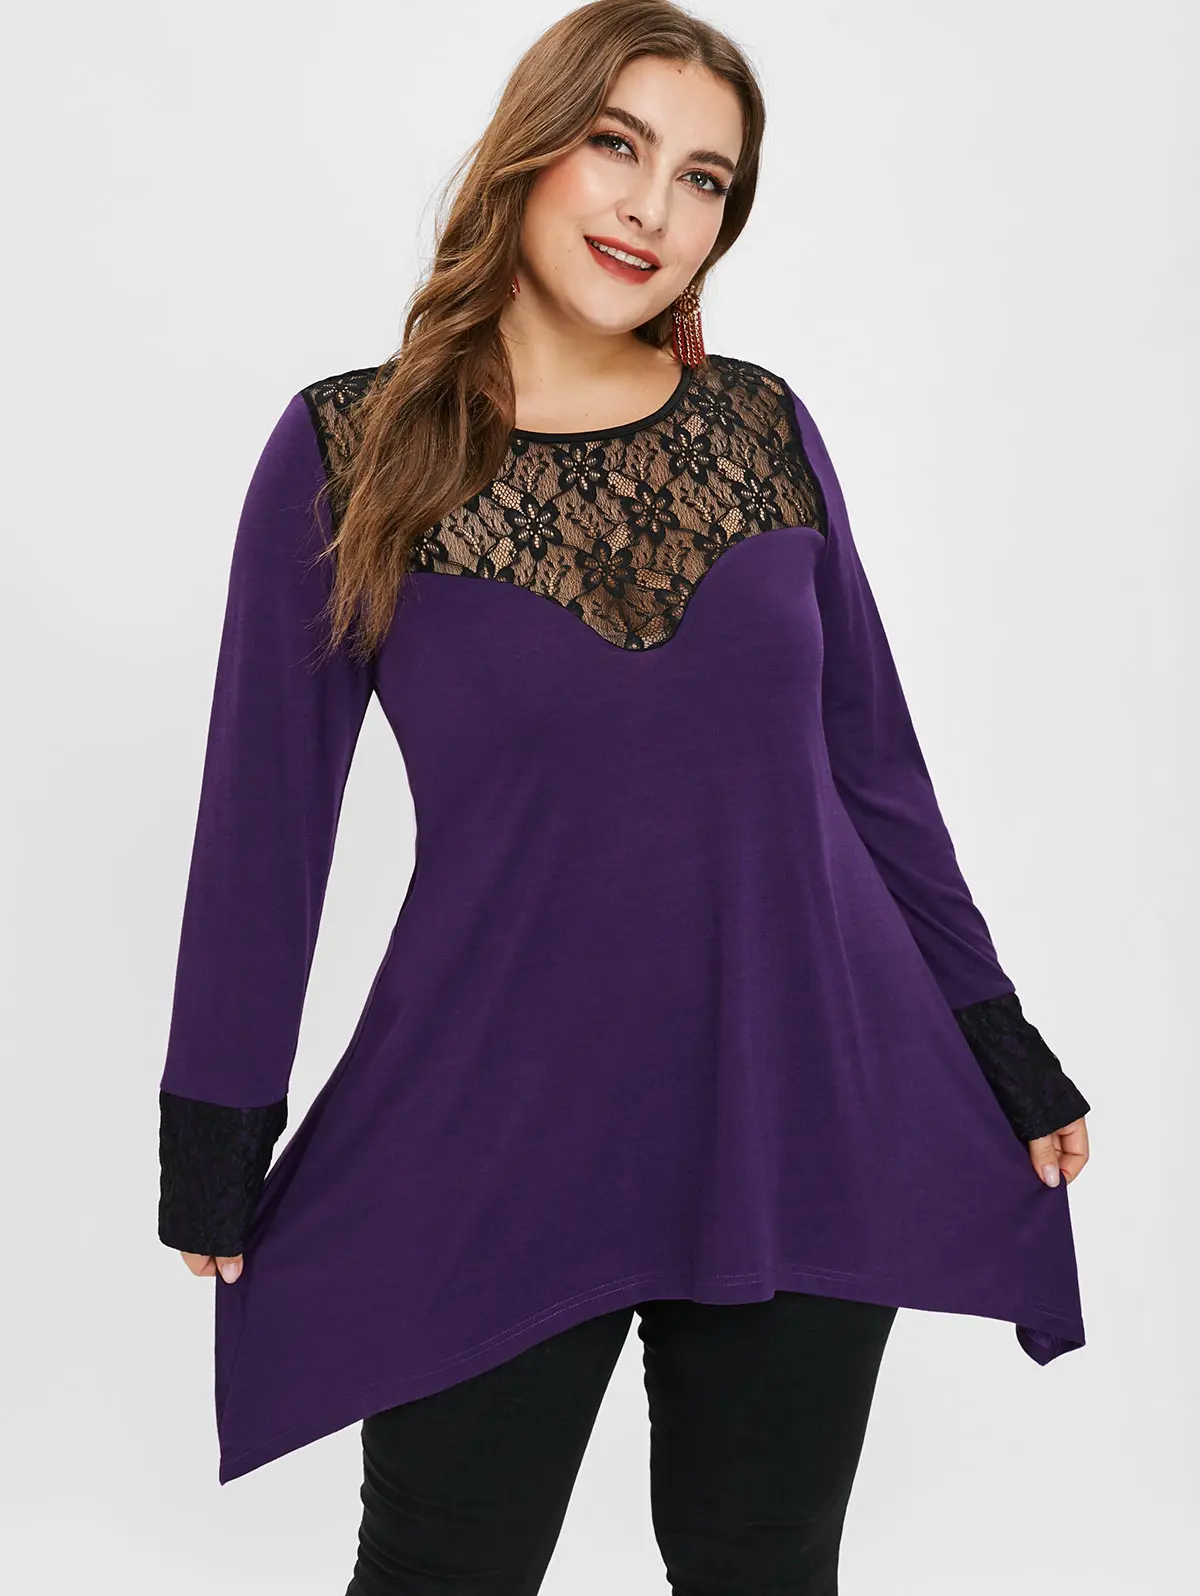 Wipalo Women Plus Size 5XL Lace Panel Two Tone Tee Sexy Sheer Lace